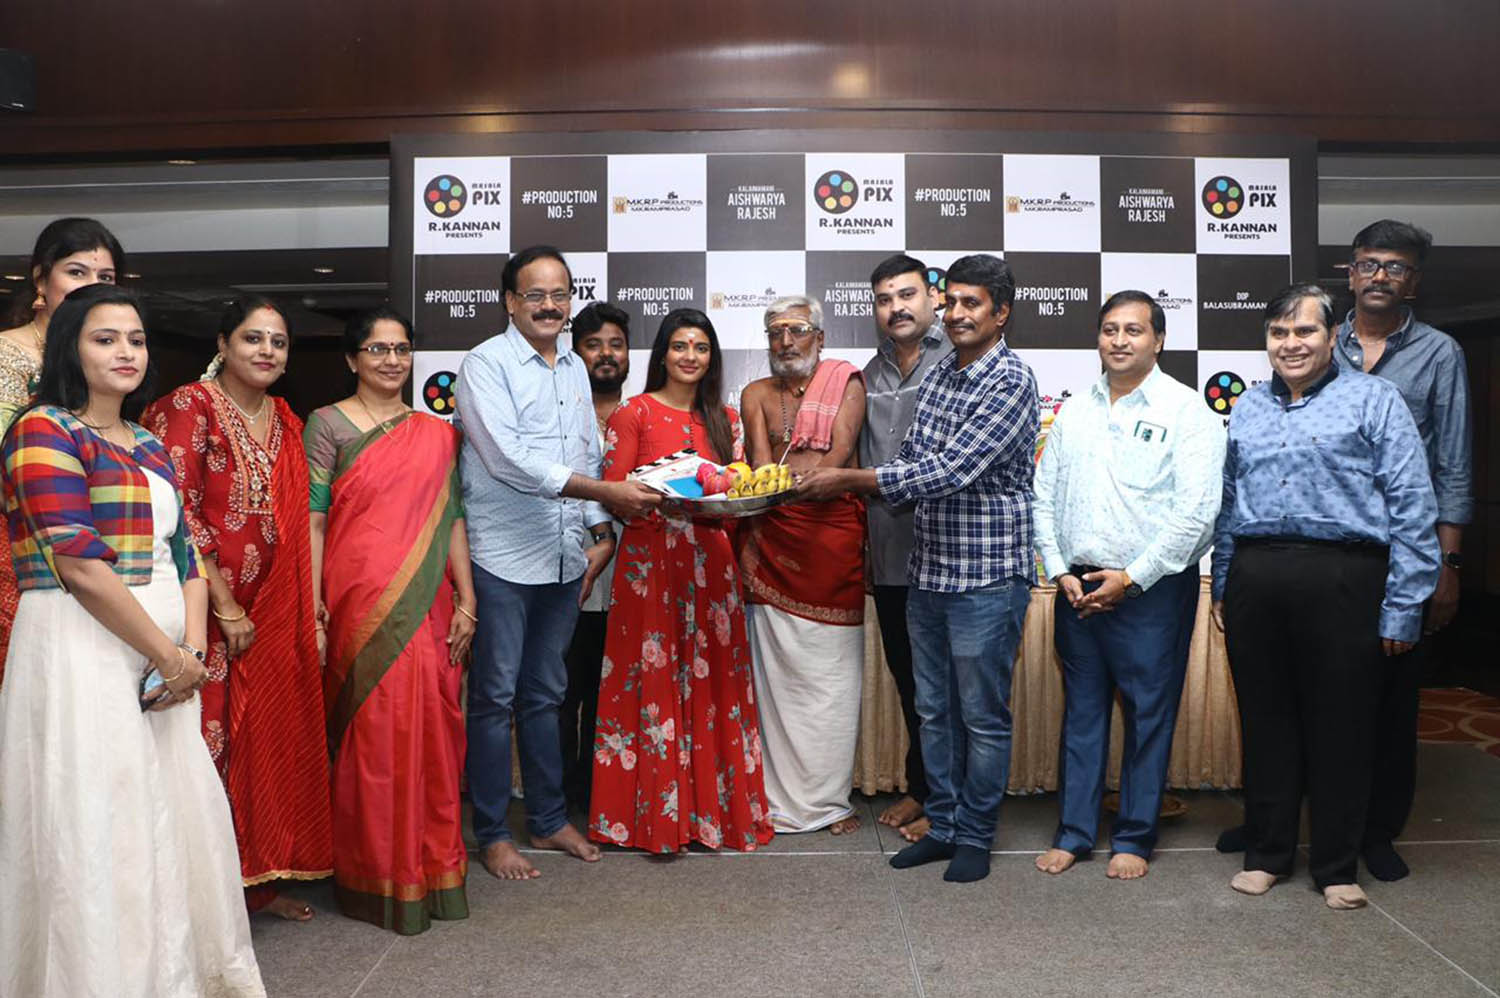 the great indian kitchen tamil remake,the great indian kitchen tamil remake pooja event,the great indian kitchen tamil version,aishwarya rajesh,aishwarya rajesh in the great indian kitchen tamil remake